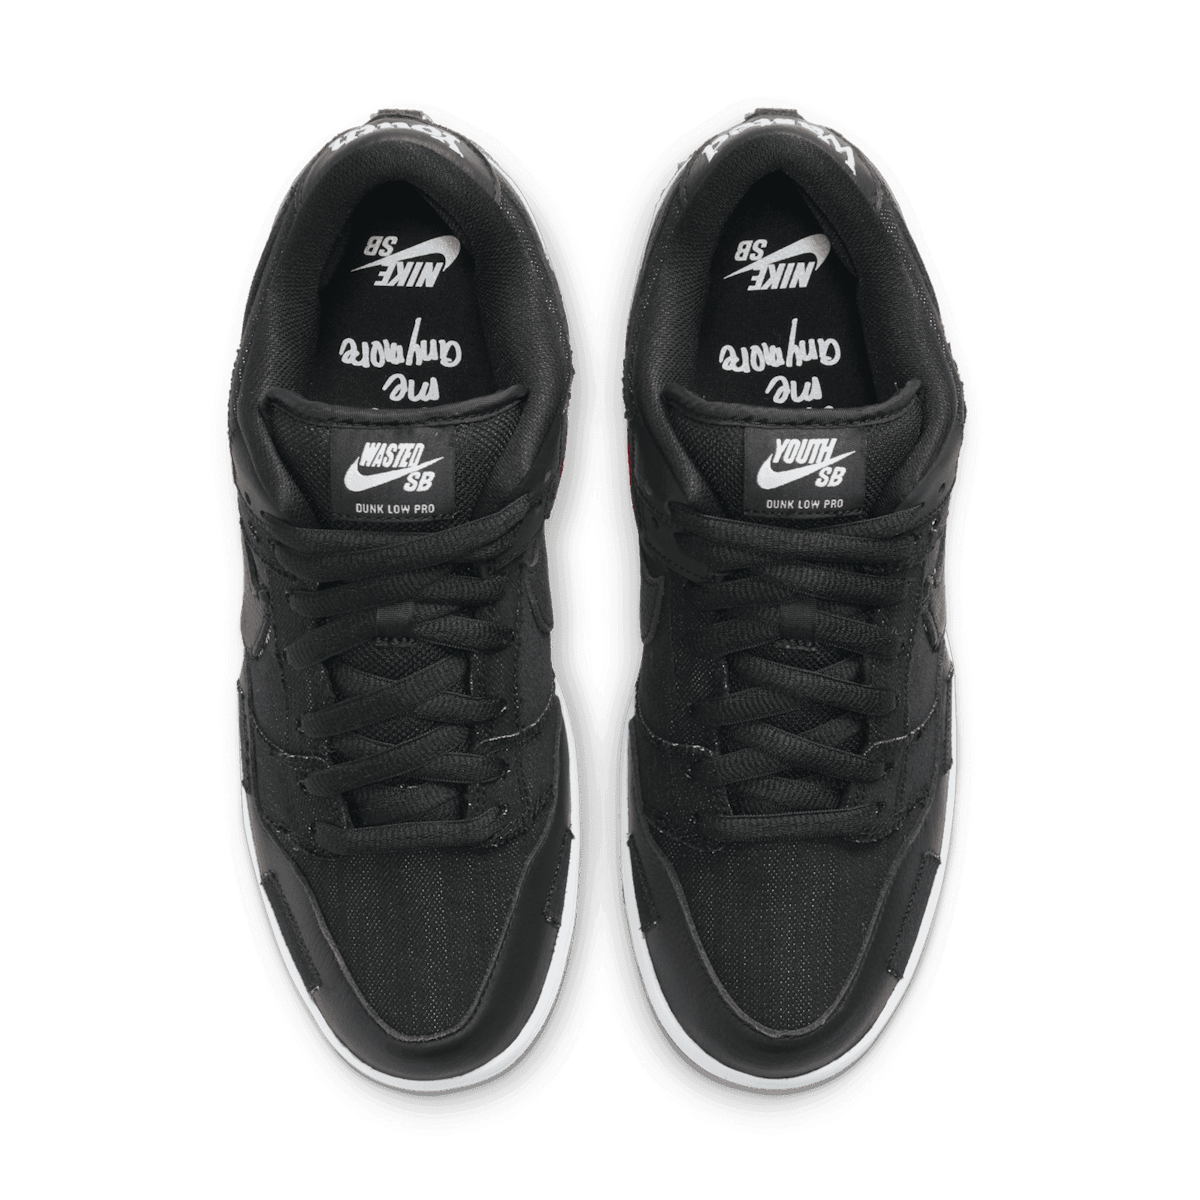 Nike SB Dunk Low Wasted Youth Angle 1